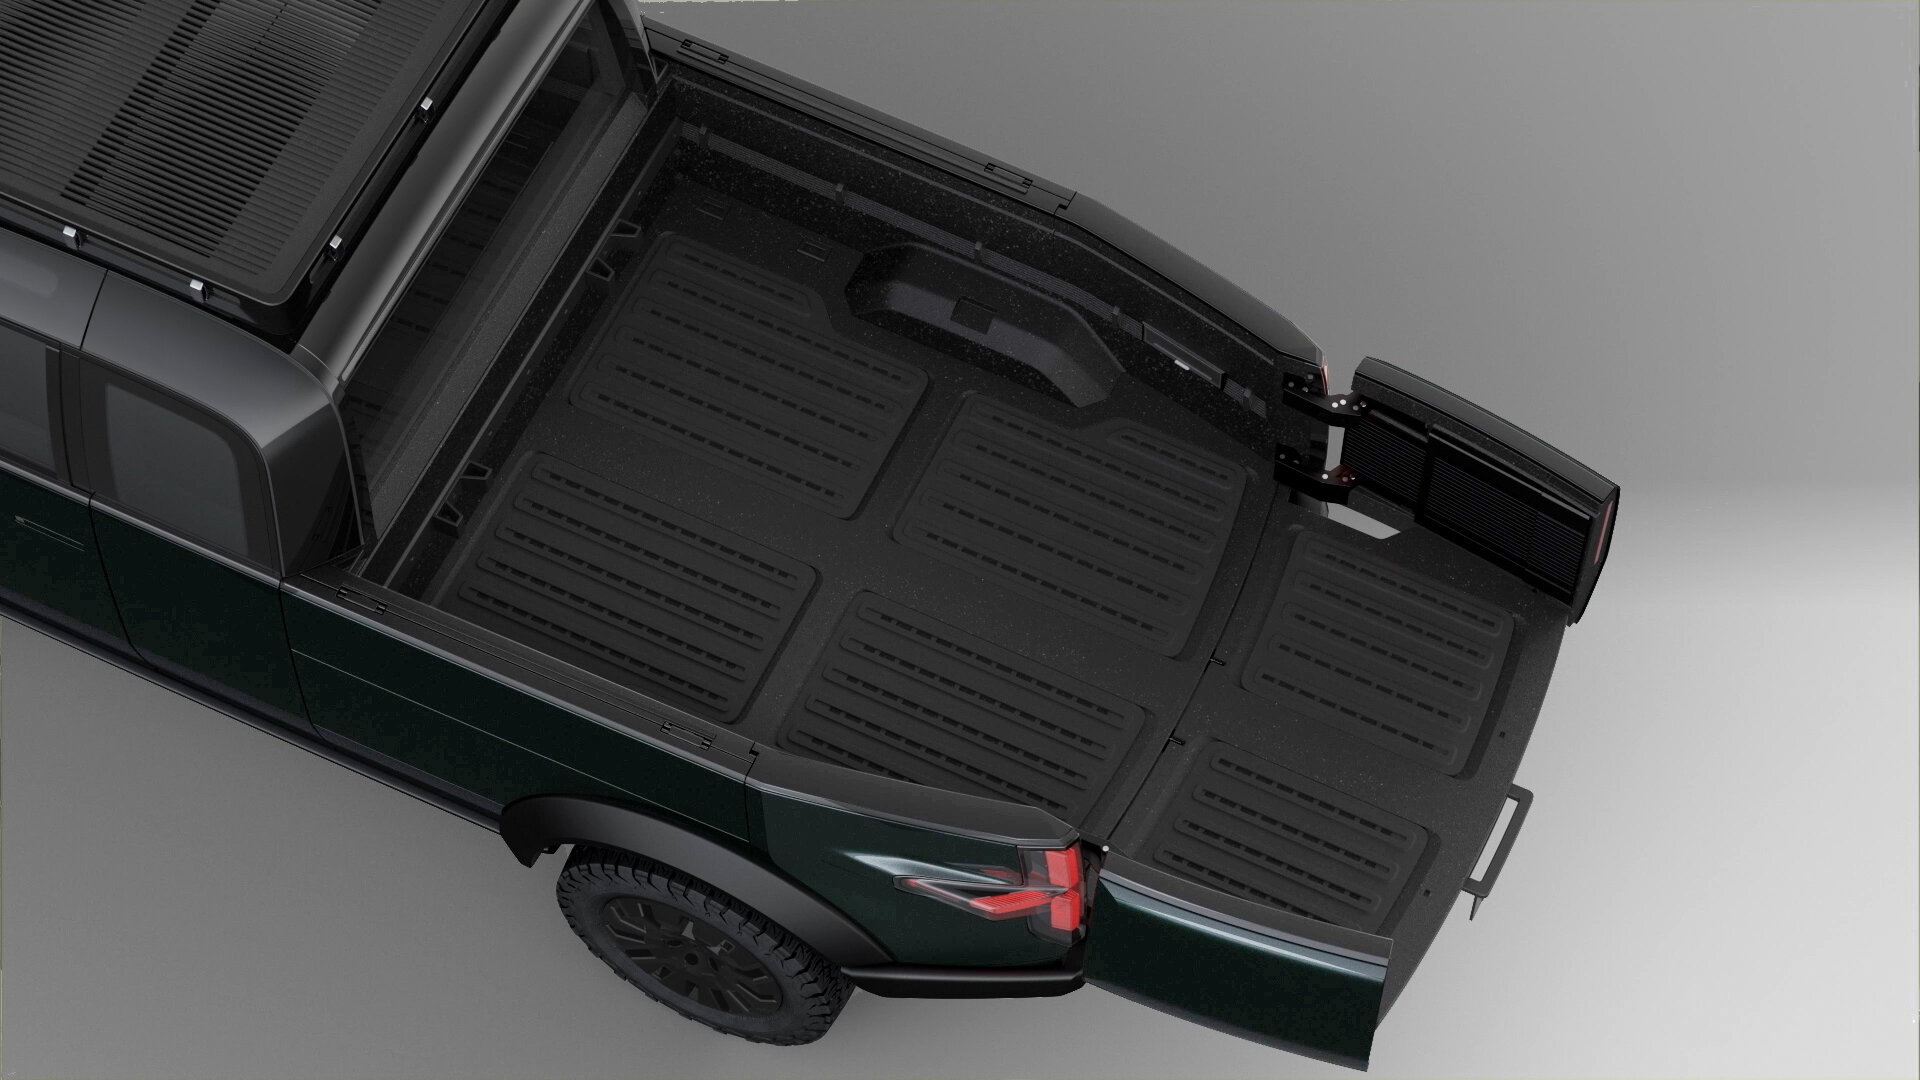 Canoo S New Pickup Is All Electric, What Are The Parts Of A Truck Bed Called